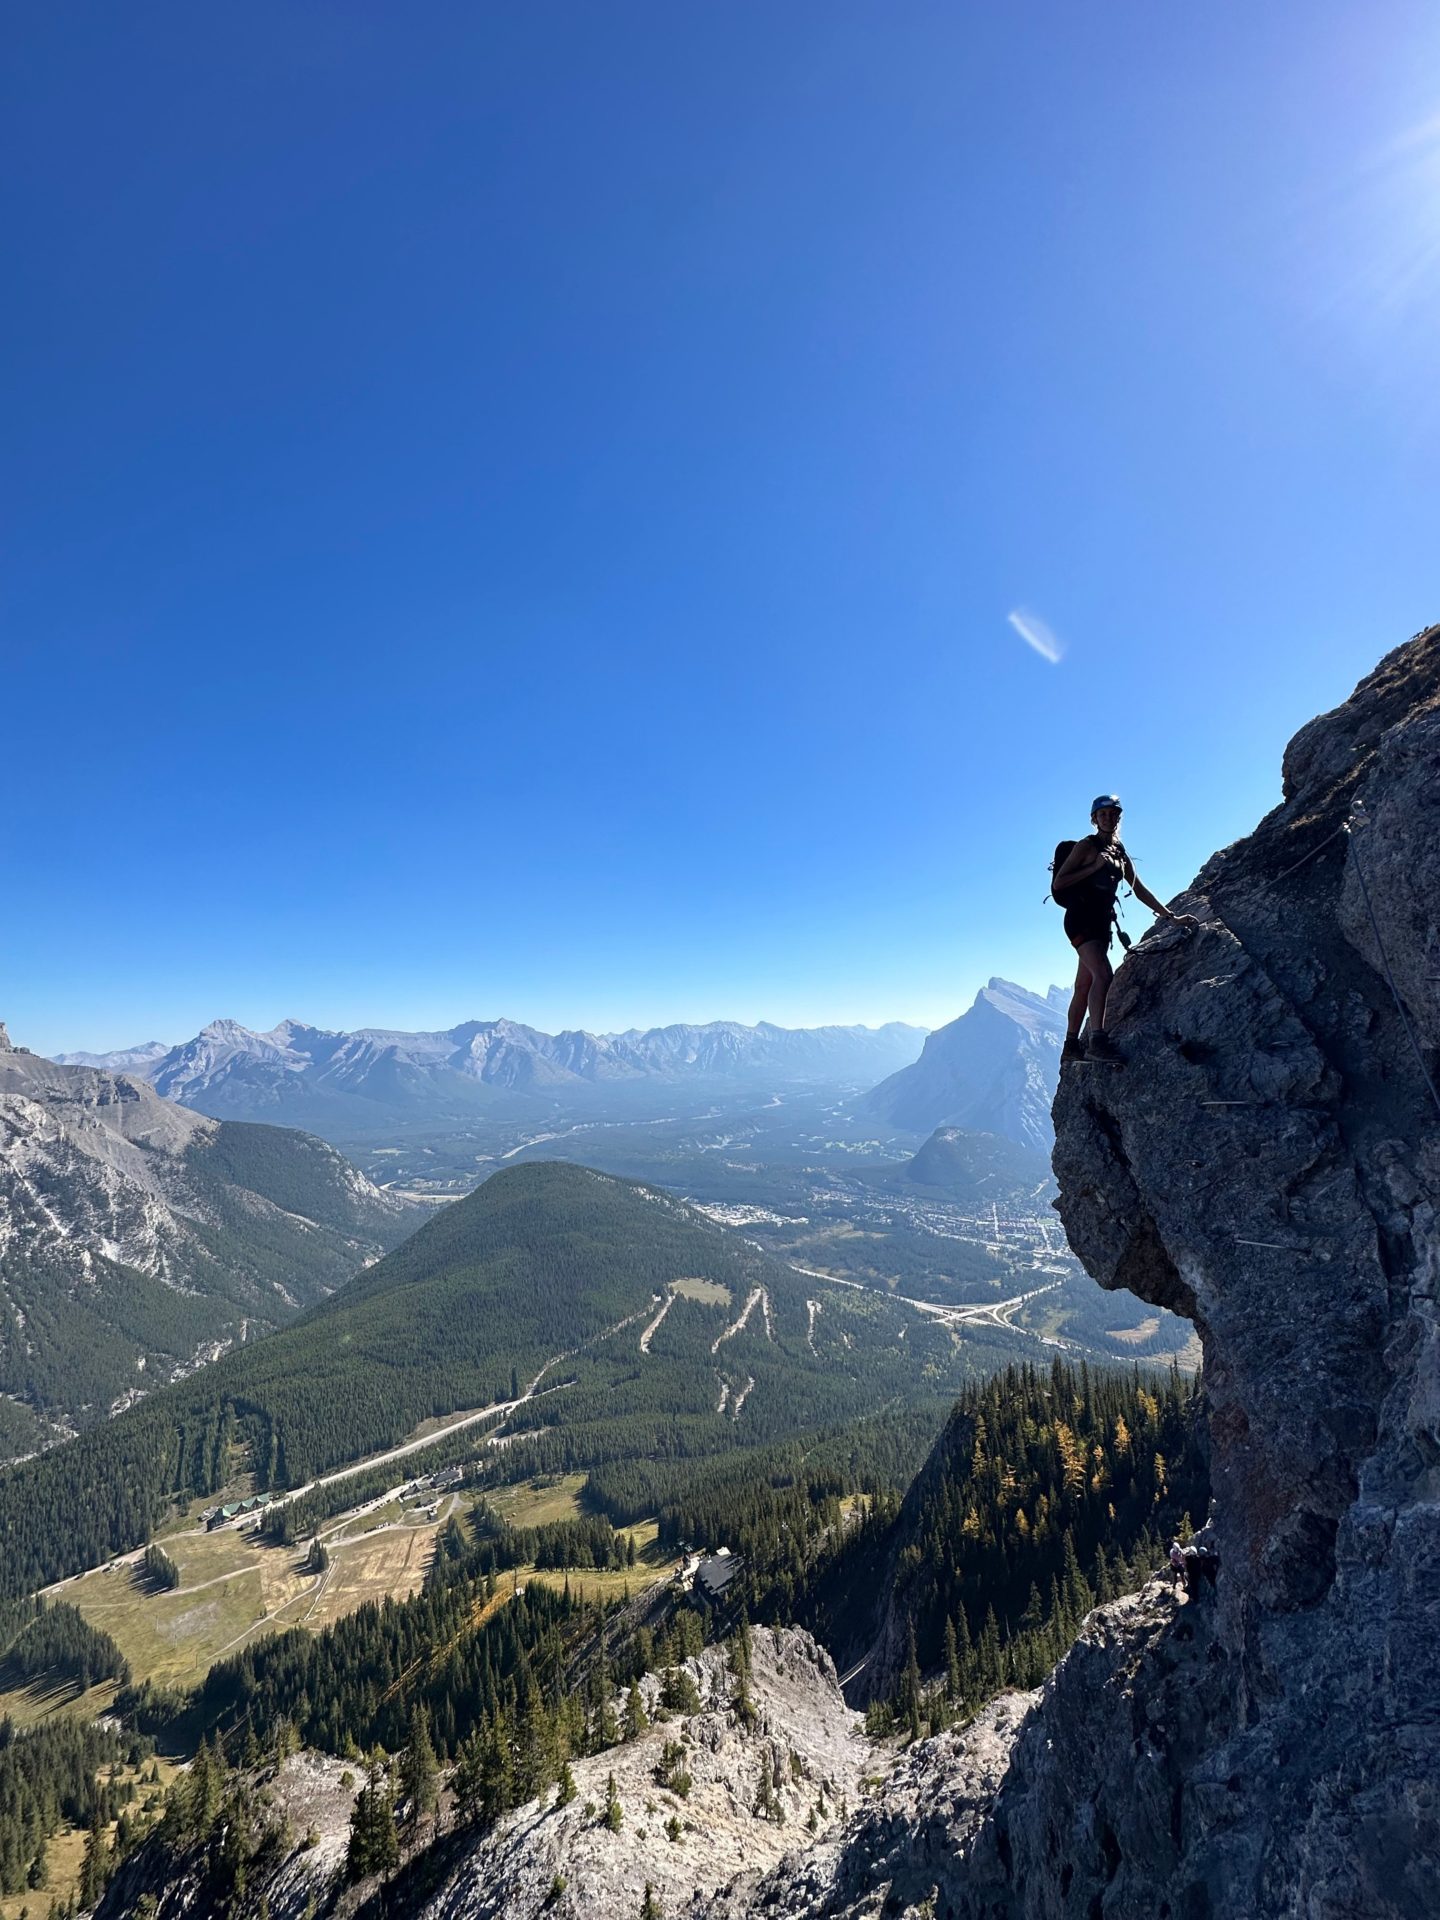 Zanna van Dijk stands on the side of a mountain, attached to the Mount Norquay via ferrata in Banff, the Rockies - Canada Road Trip Itinerary